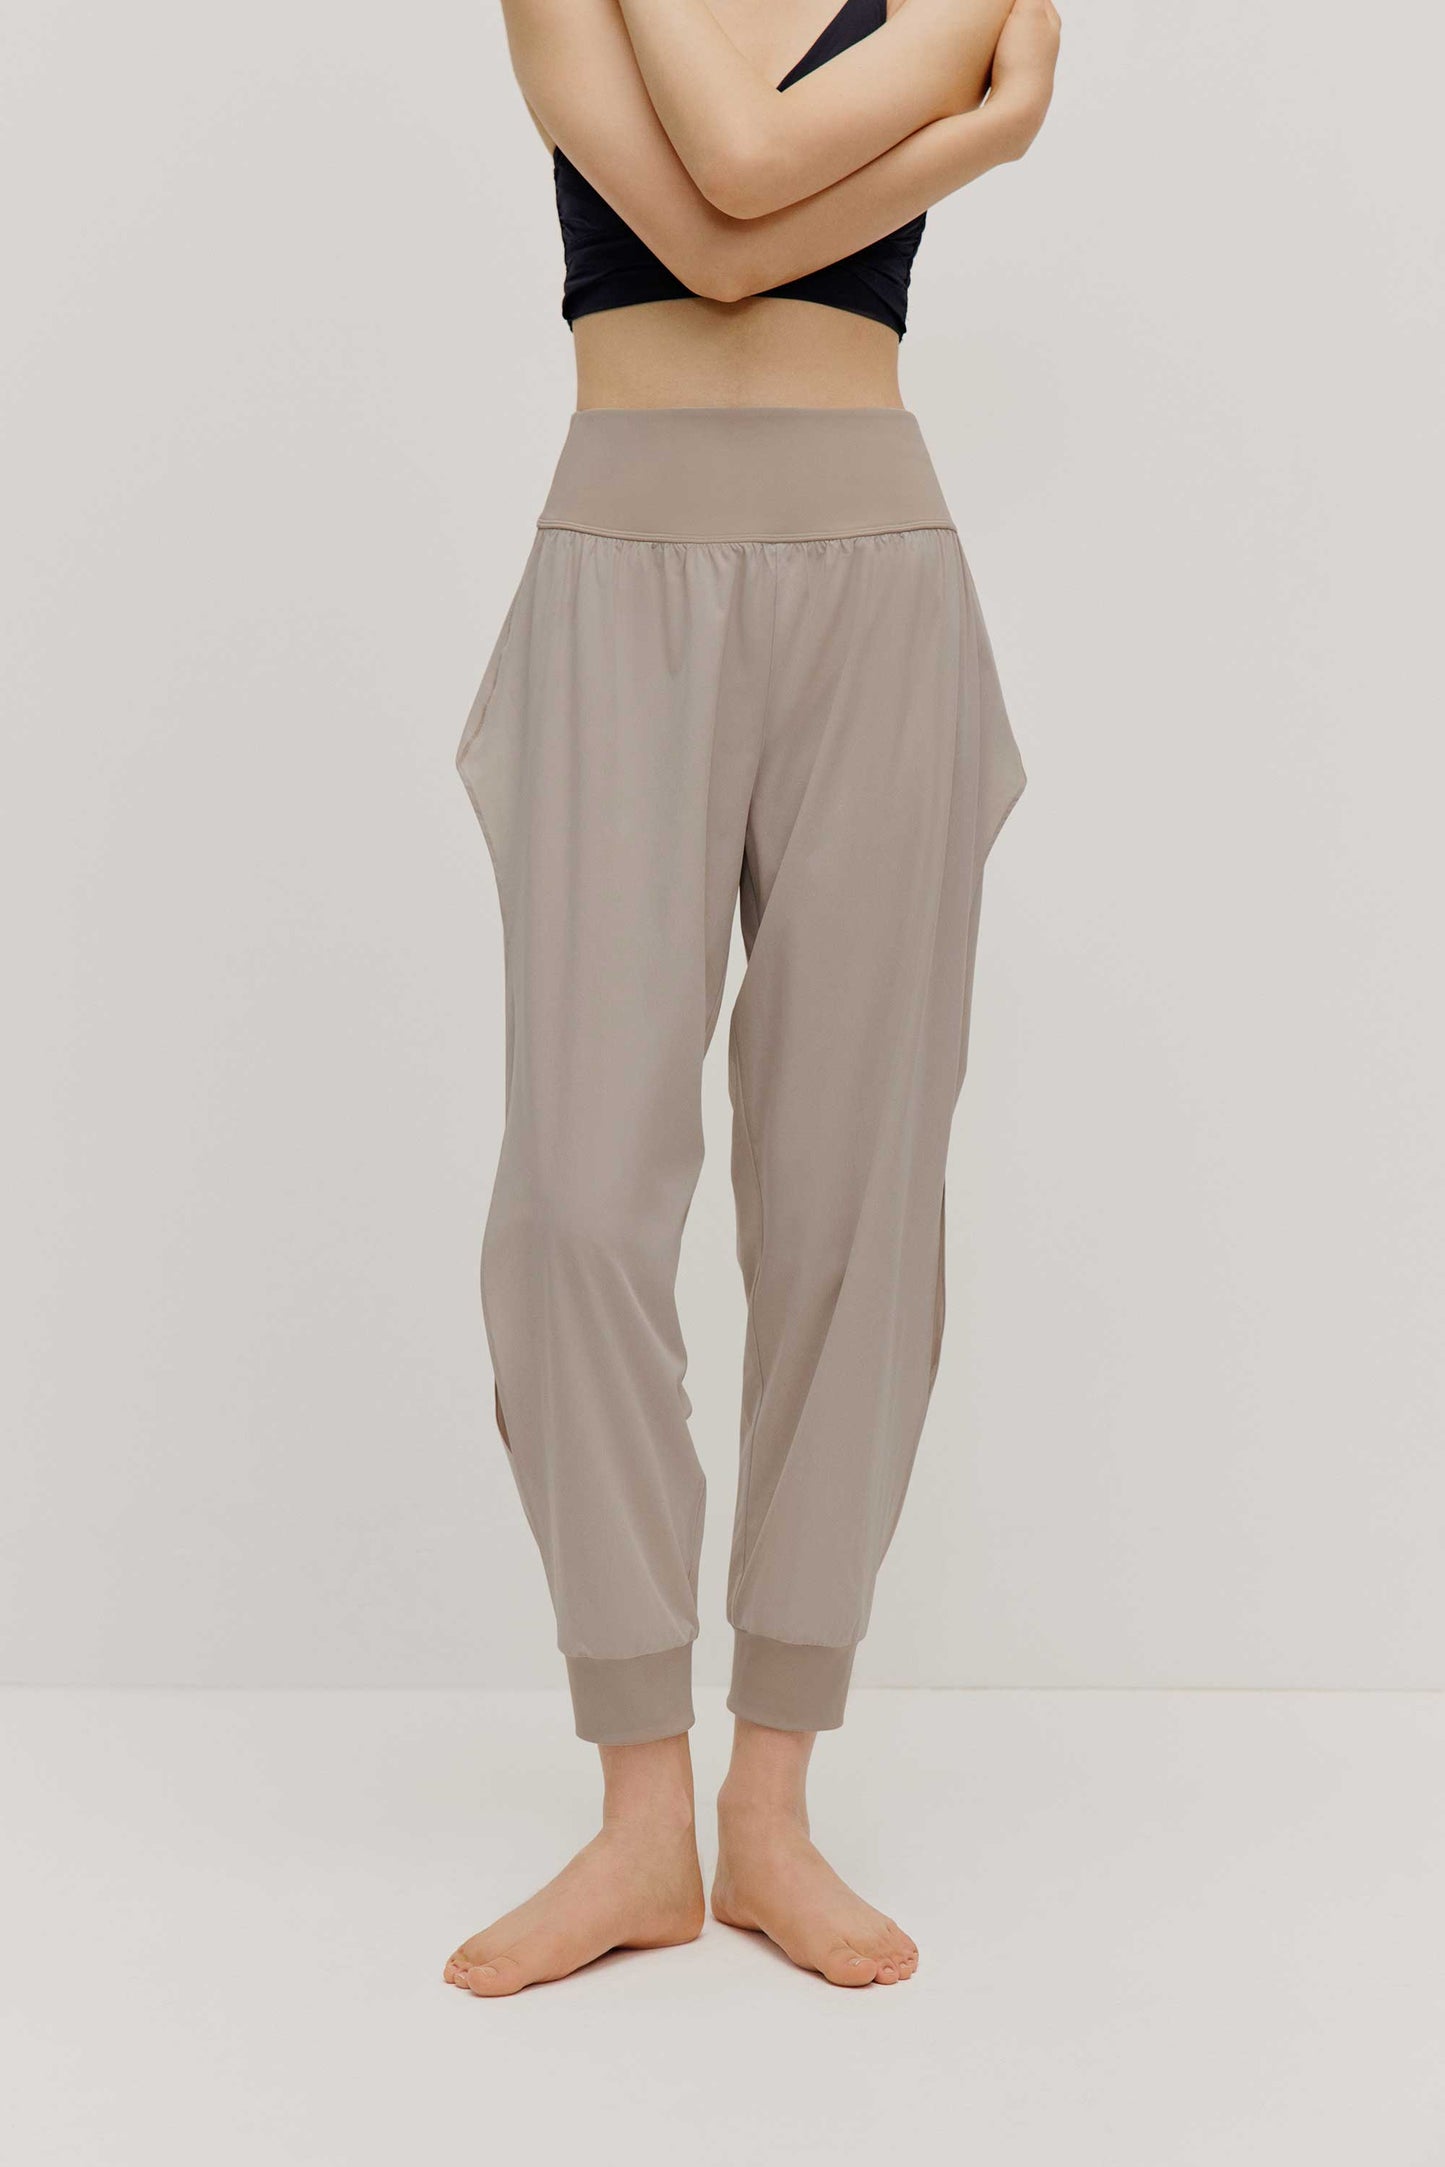 The front view of a woman wearing a pair of light grey tapered joggers with side slits